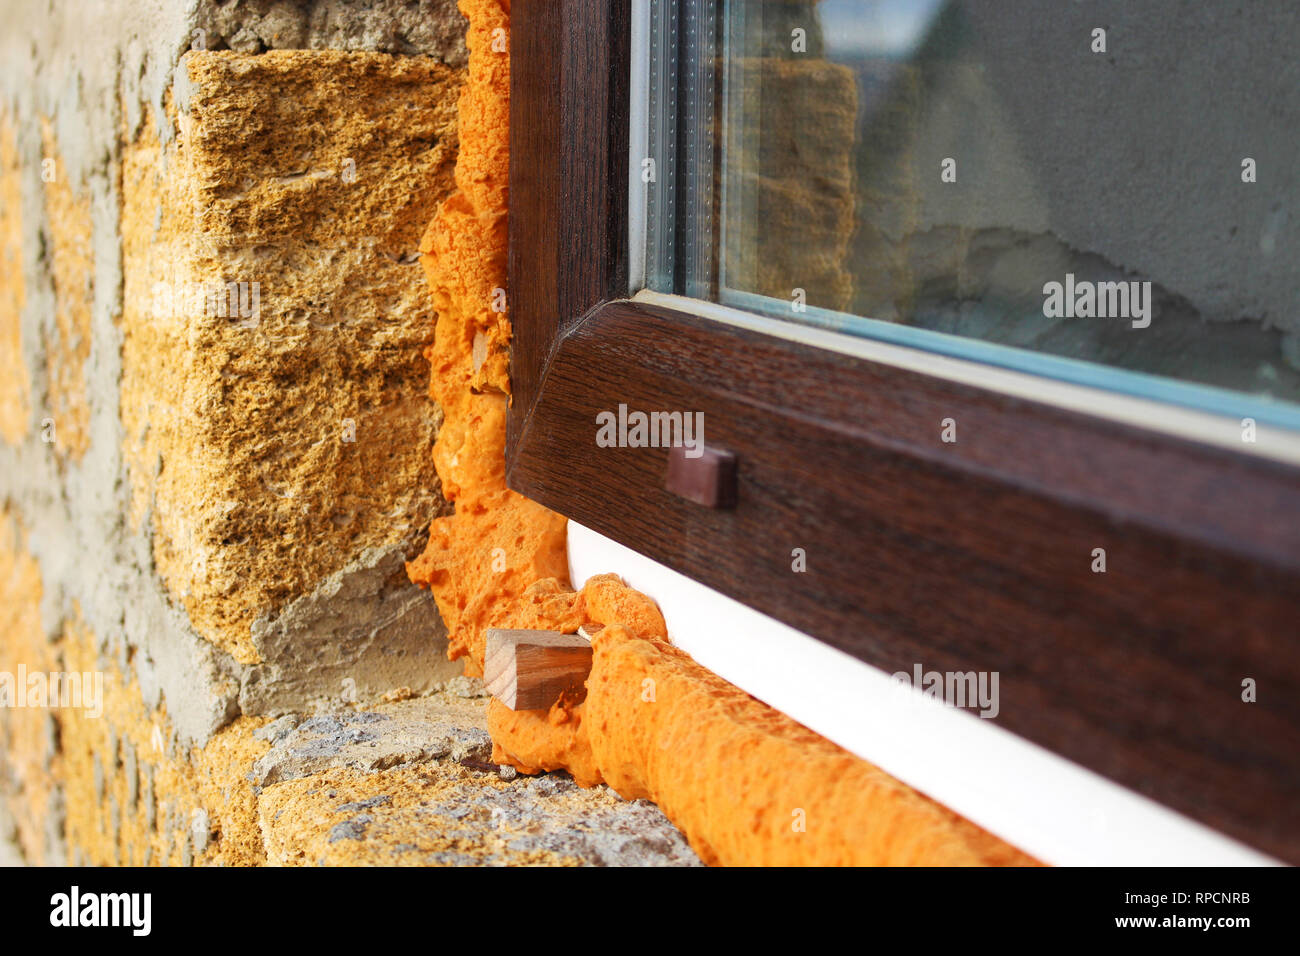 DIY Concept. Construction PU - Poly Urethane Foam. The Window Is Installed  Using A Mounting Foam. Installation Foam Stock Photo, Picture and Royalty  Free Image. Image 136369483.